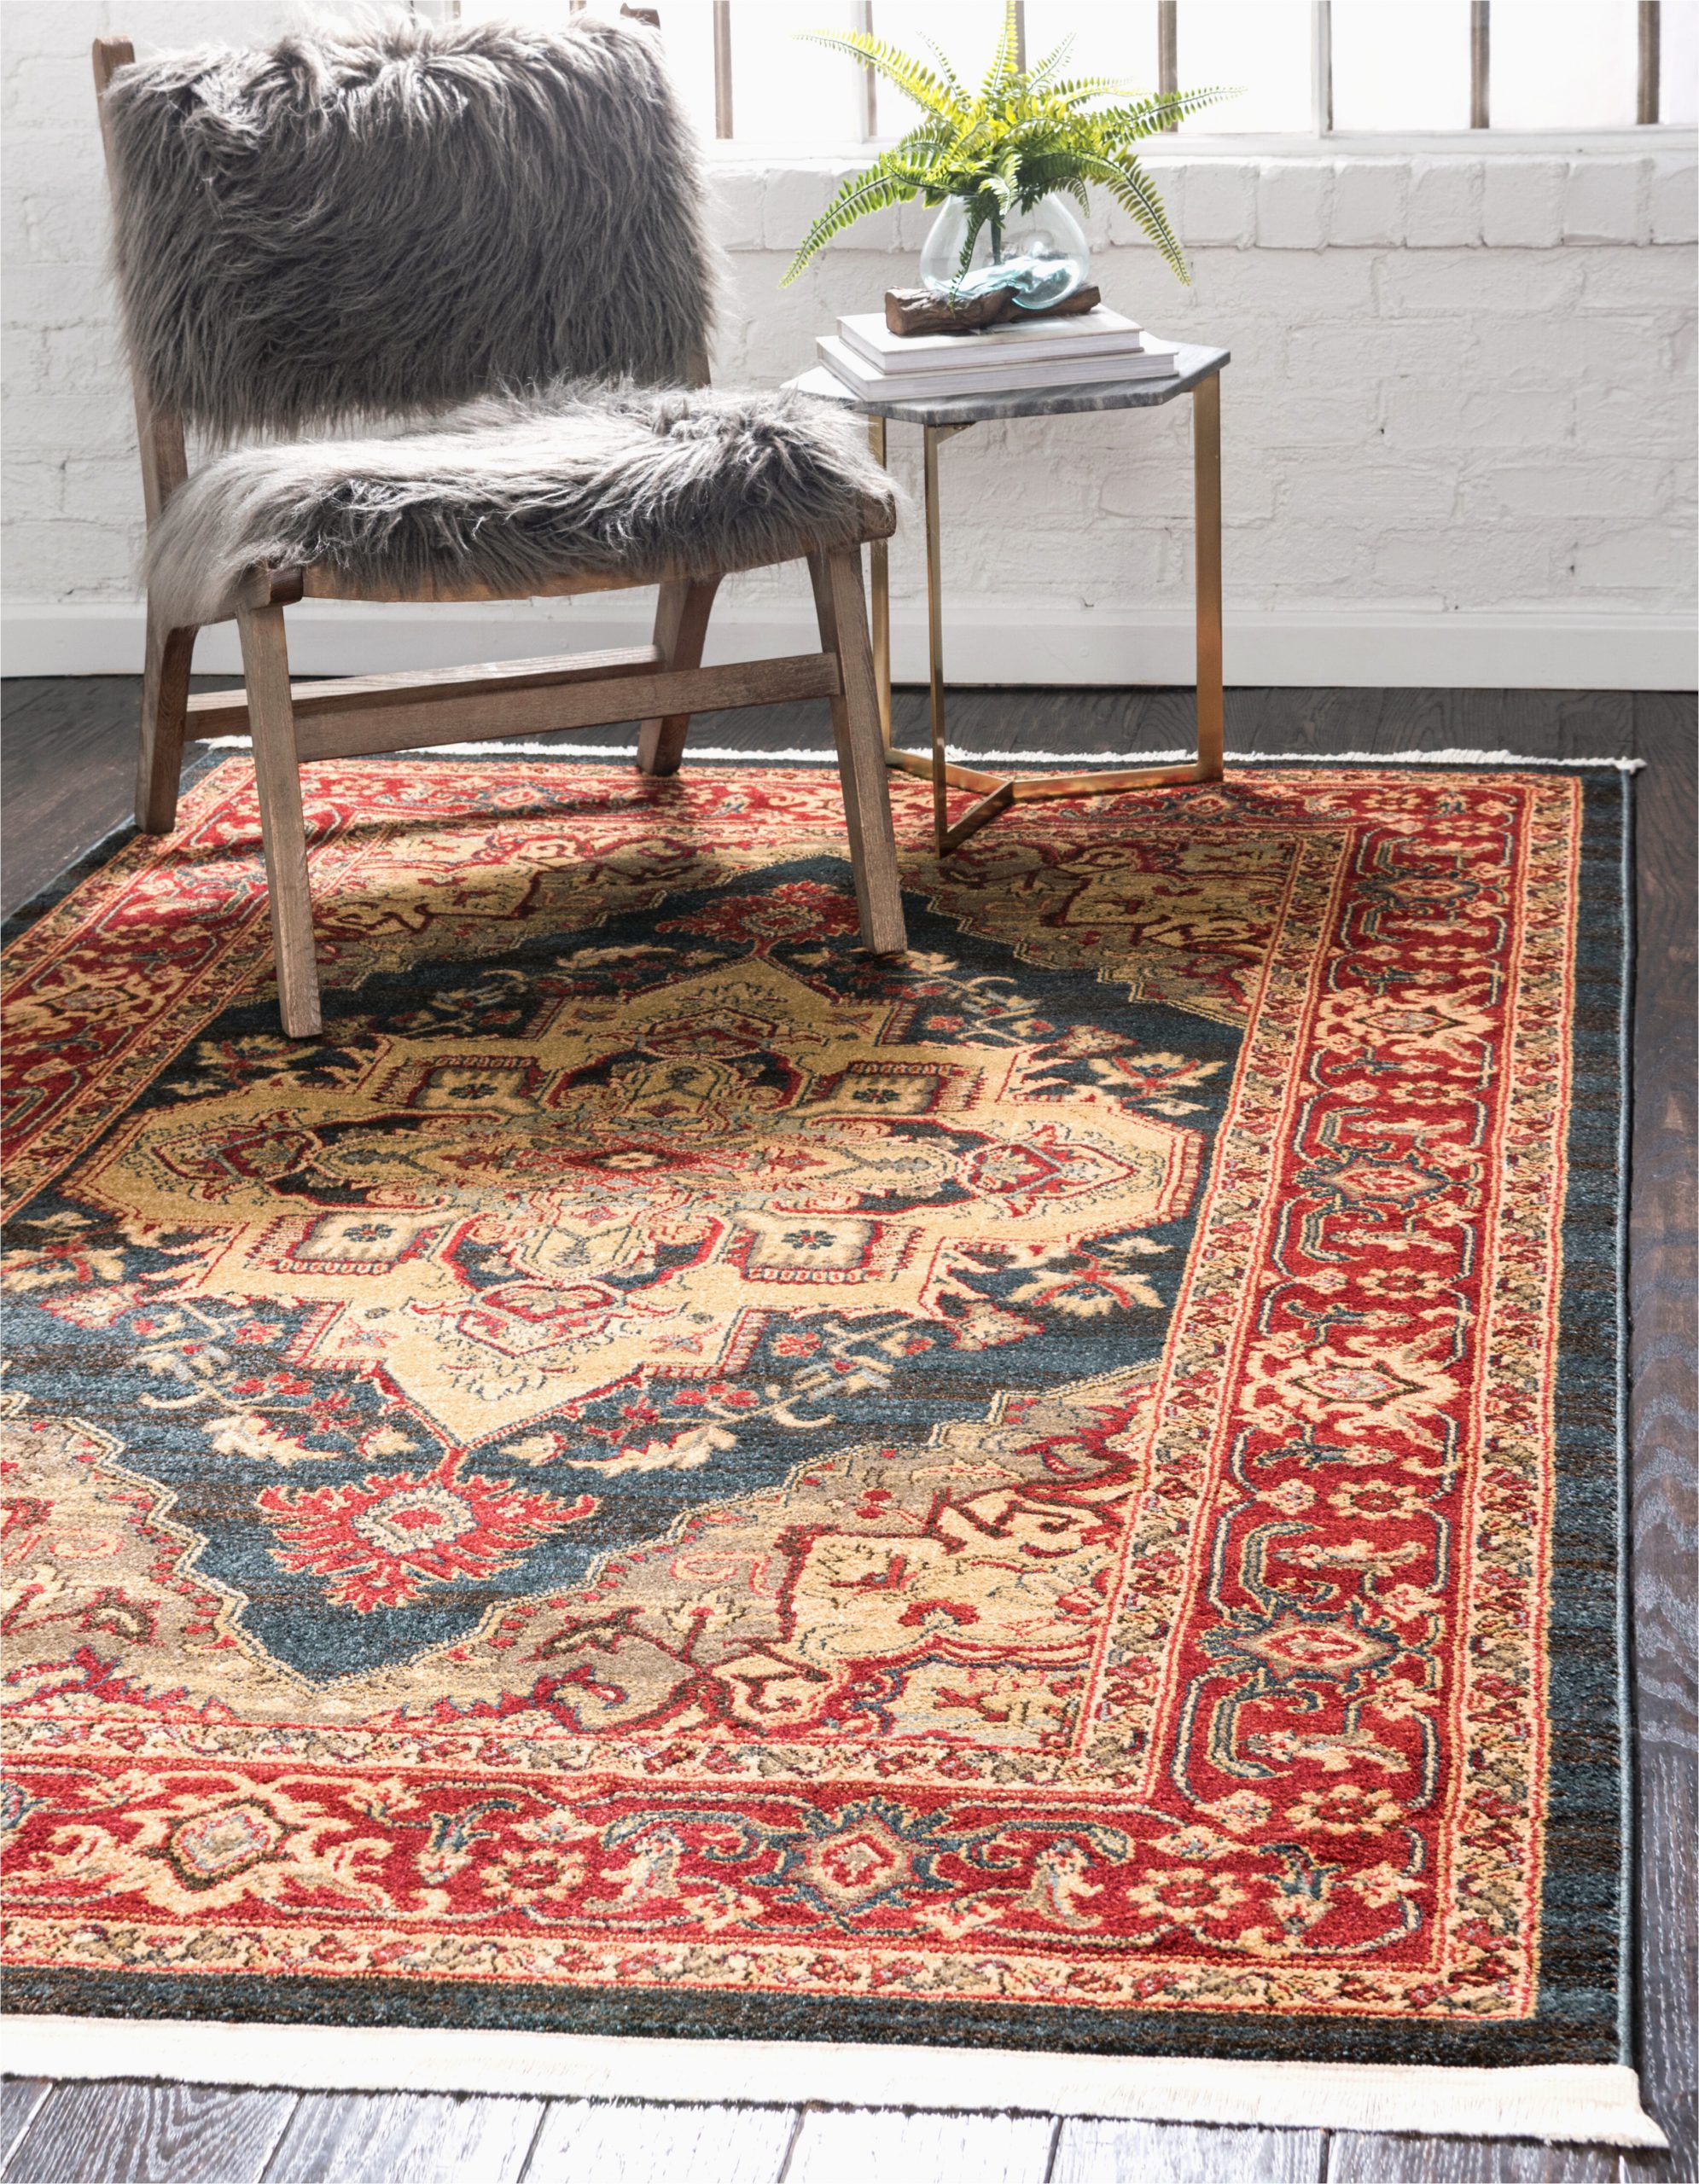 Navy Blue and Brown area Rug Mattea Persian Inspired Navy Blue area Rug